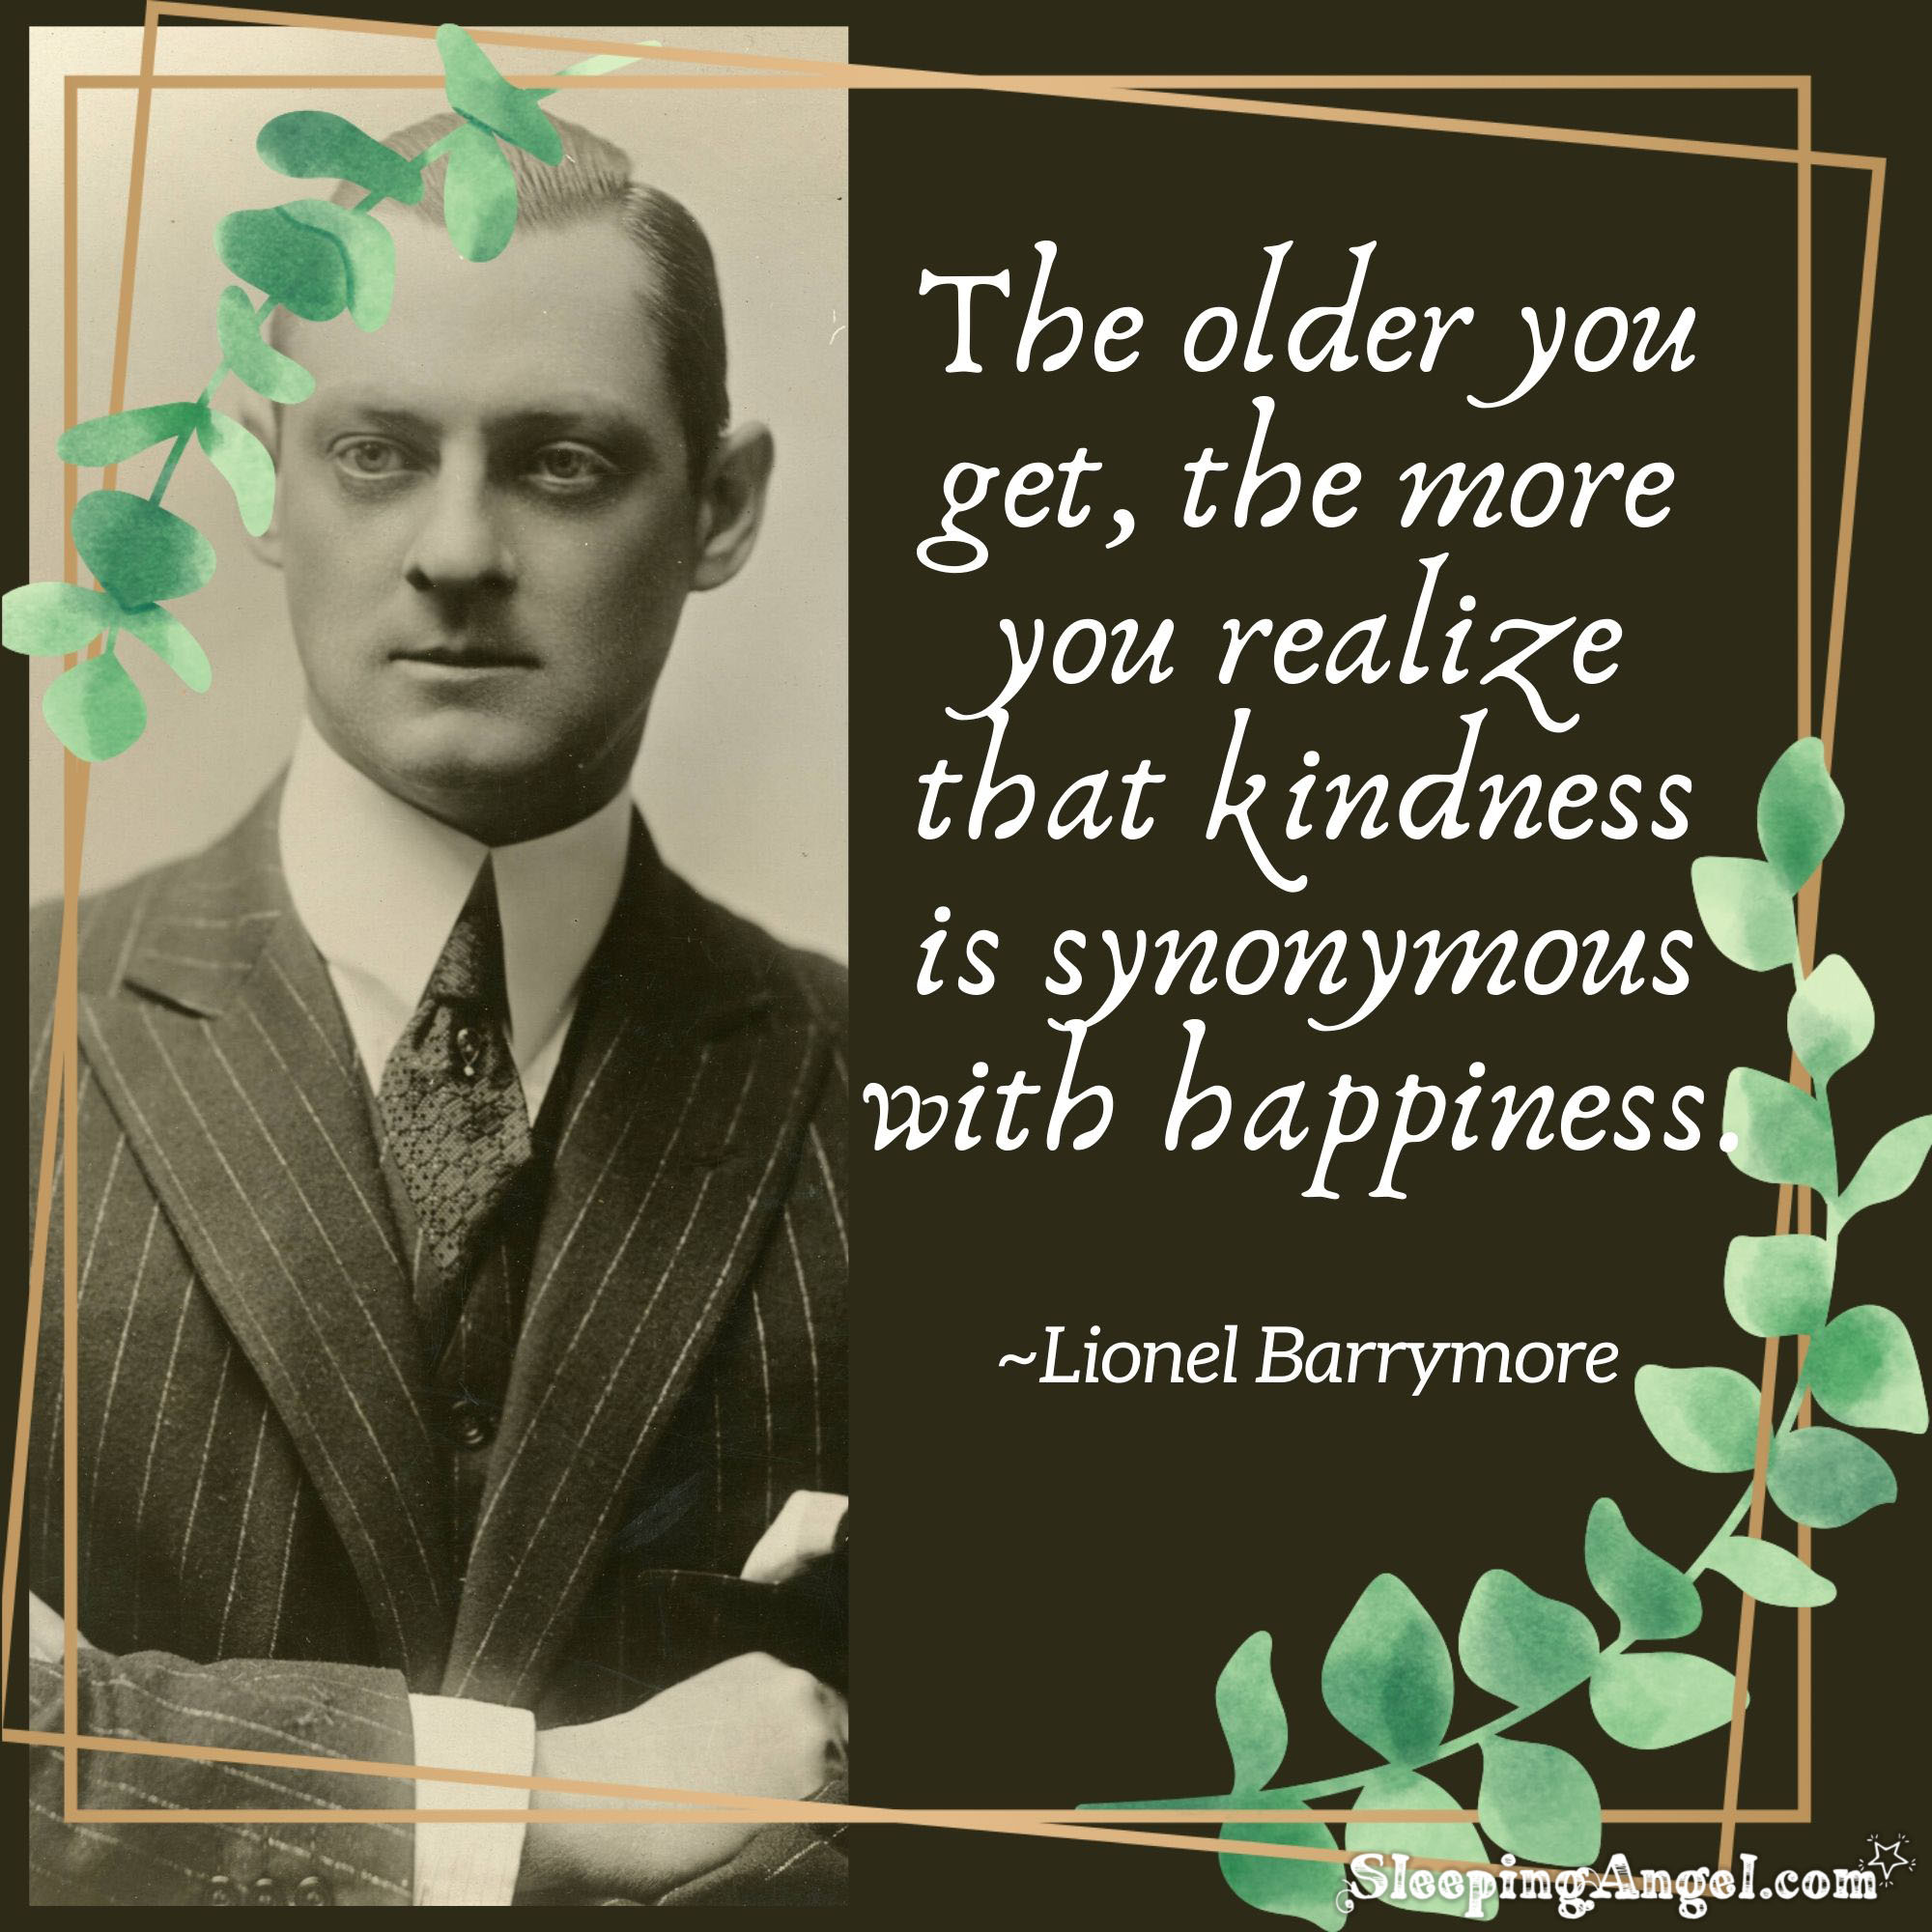 Lionel Barrymore Quote